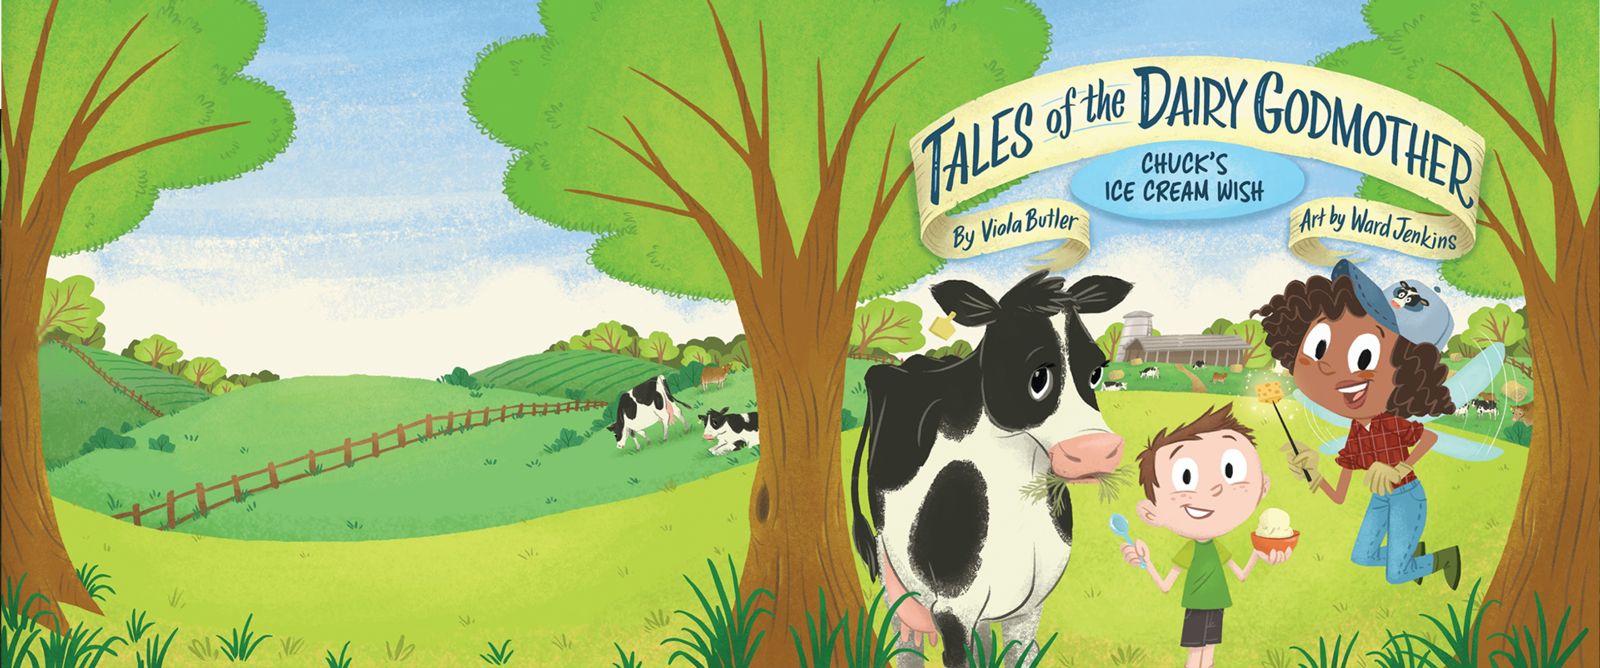 Tales of the Dairy Godmother